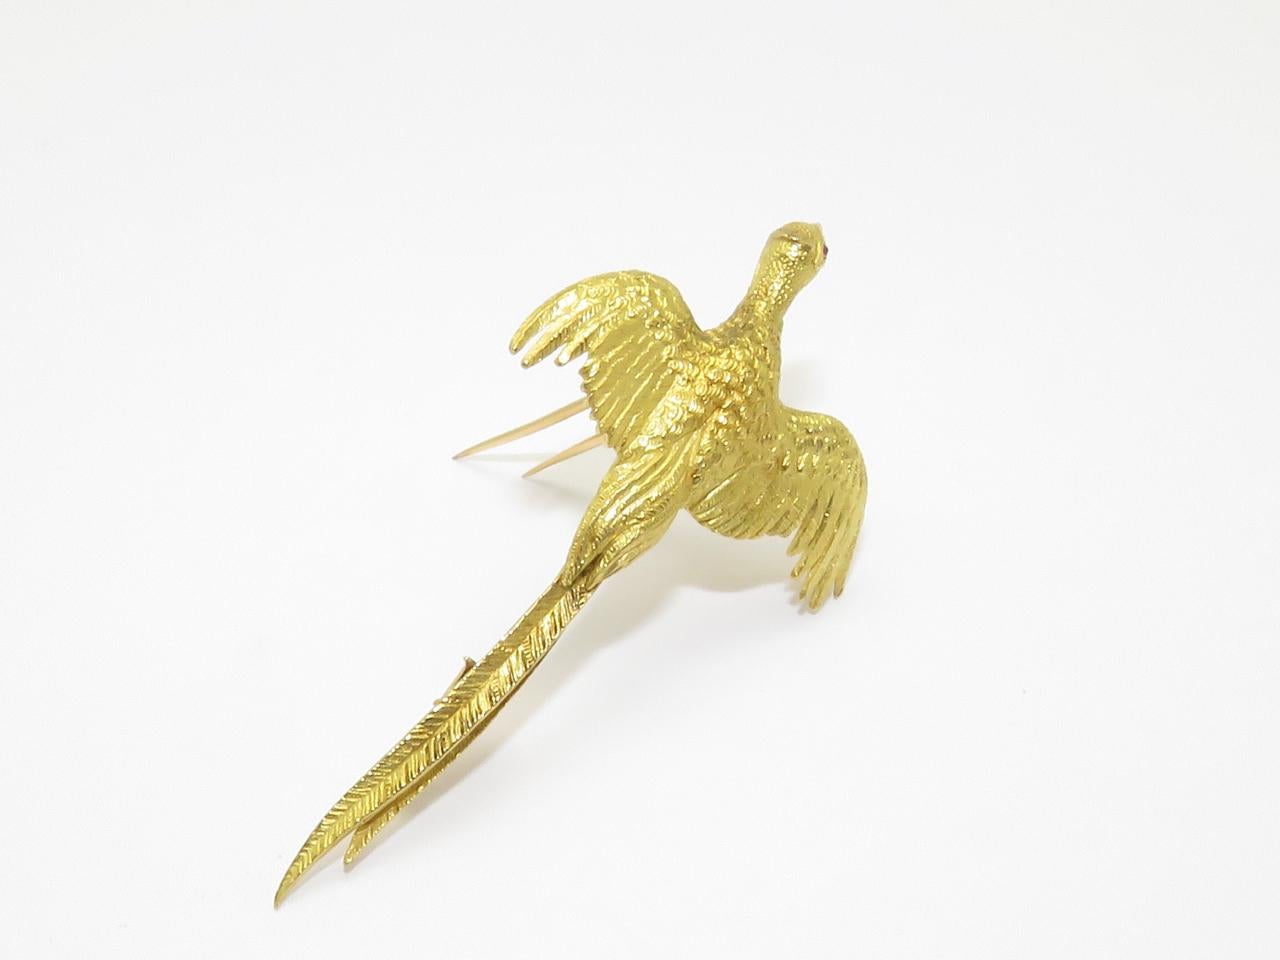 18k Yellow Gold and Ruby Eye Pheasant Bird brooch ,
measuring 65 mm in length and 37 mm in width.
Weight: 12.8 grams

Signed 